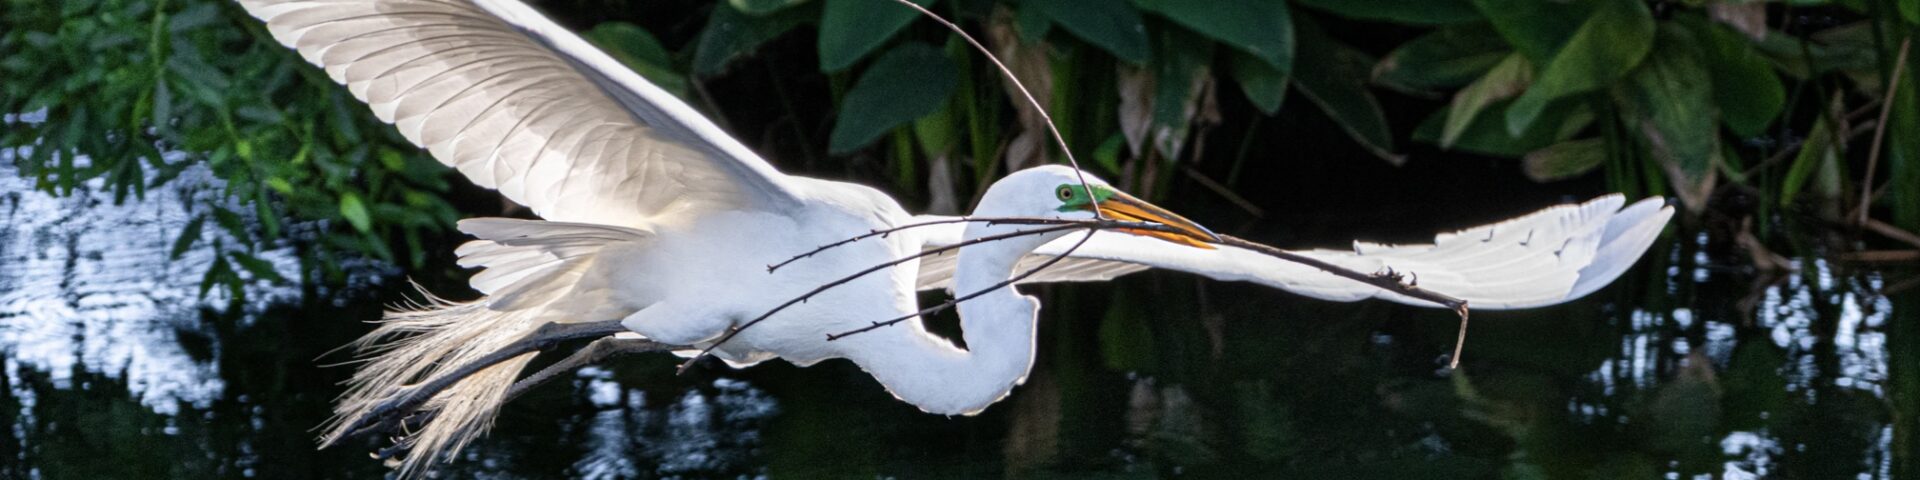 A bird flying over water with its wings spread.